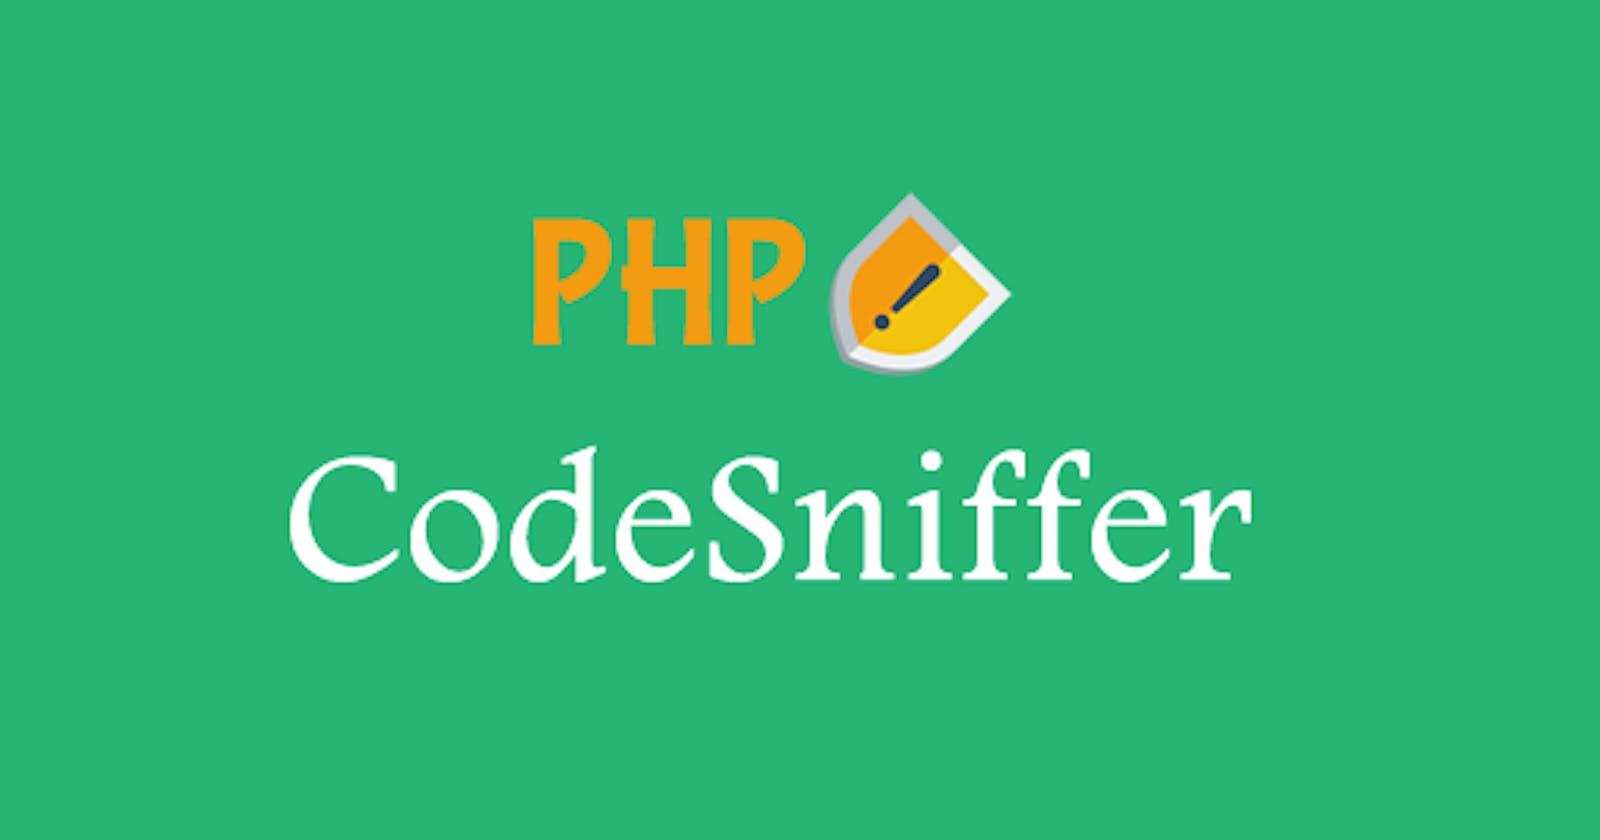 PHPCS: PHP Code Sniffer